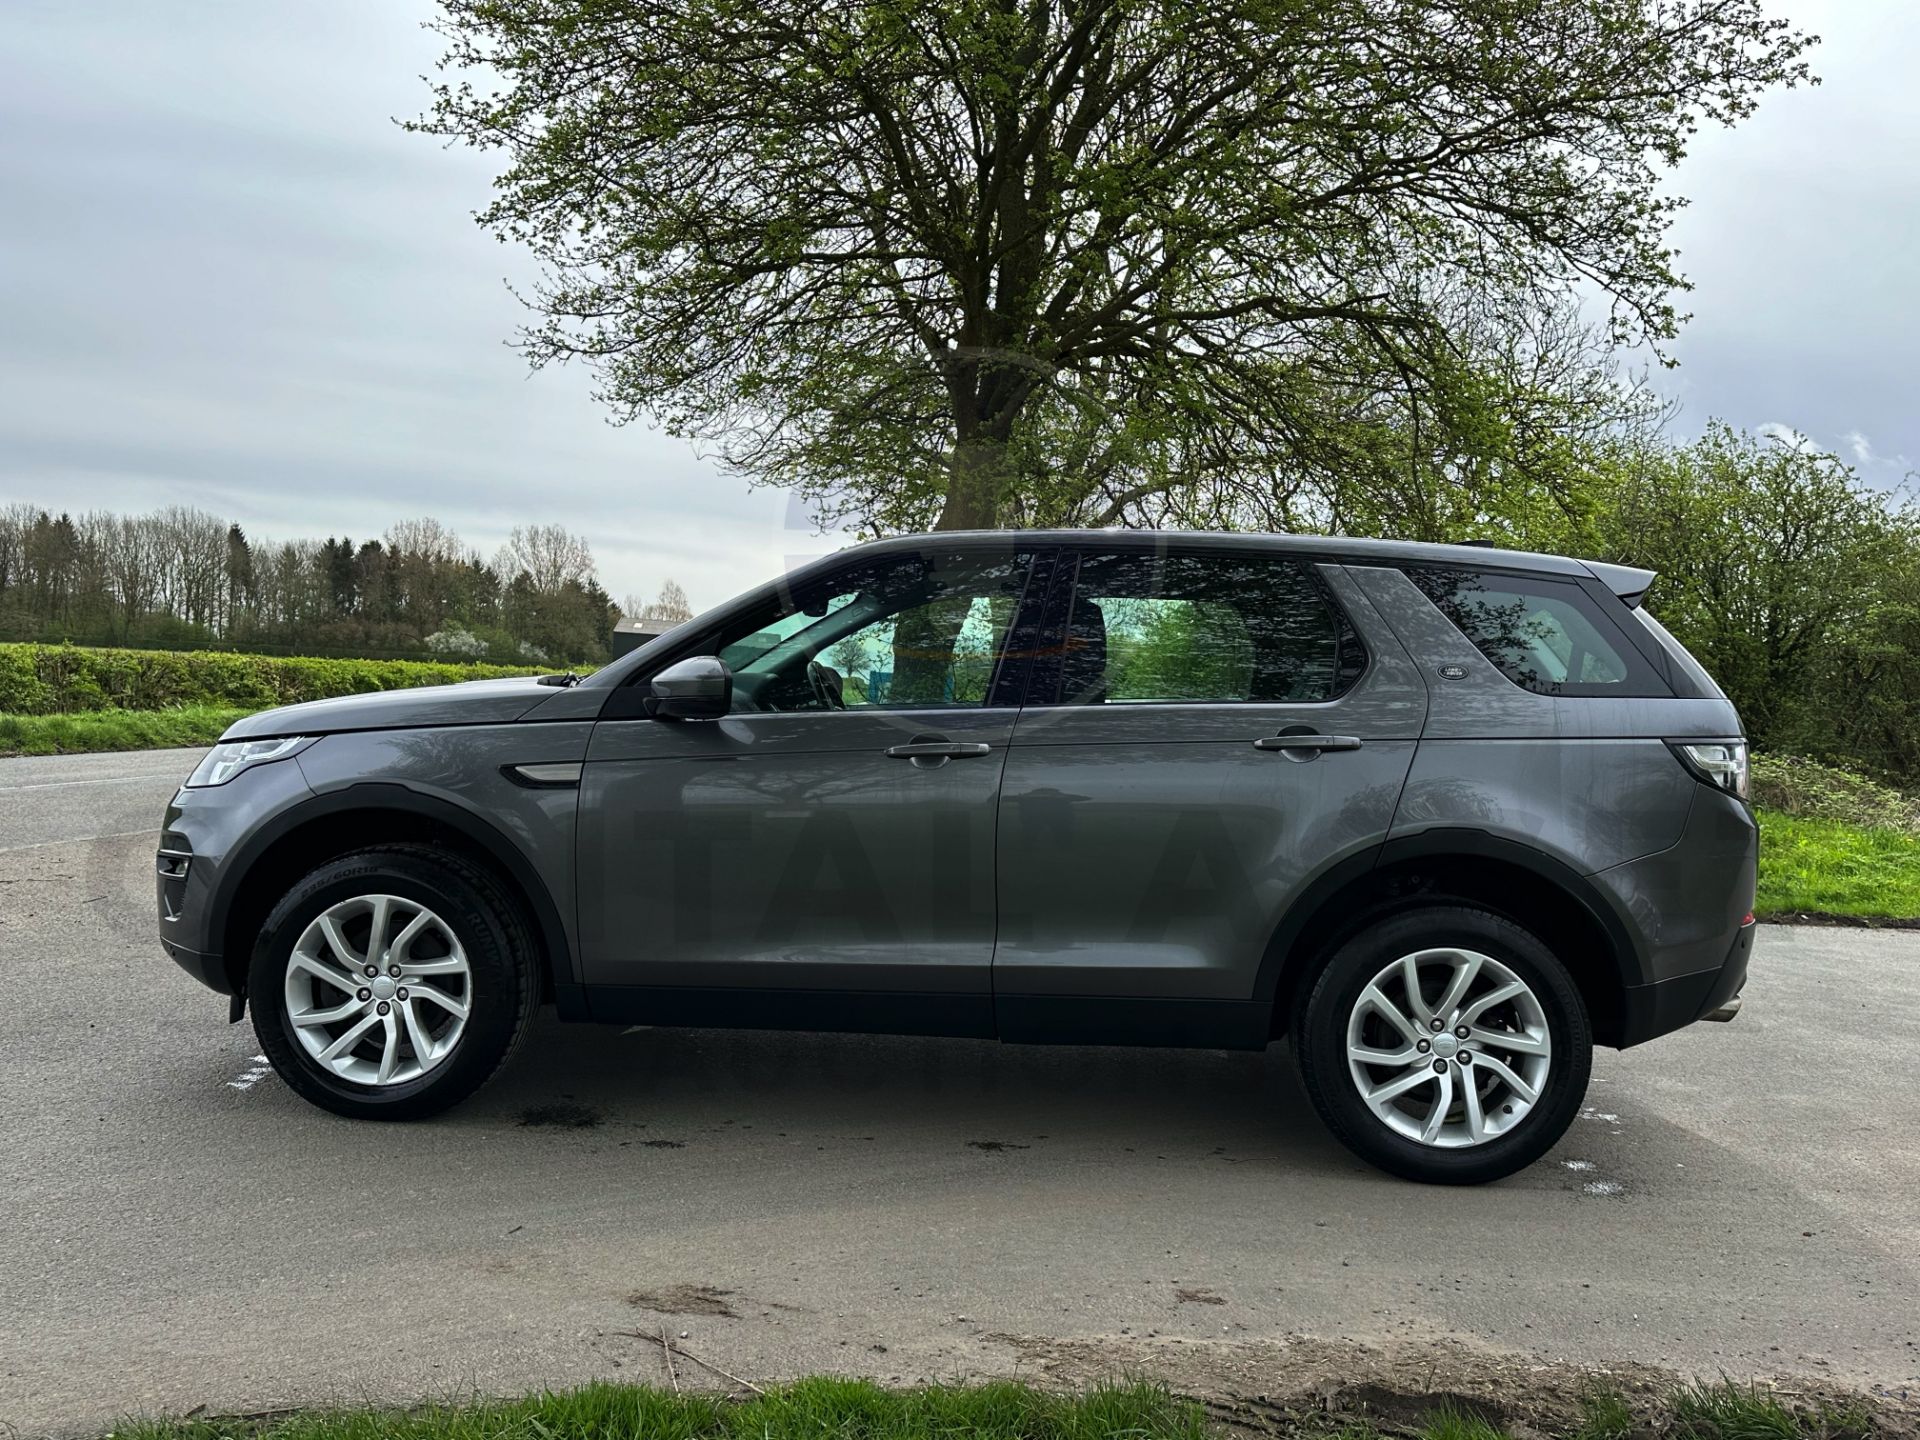 (On Sale) LAND ROVER DISCOVERY SPORT *SE TECH* 5 DOOR SUV (2018 - EURO 6) 2.0 TD4 - AUTO *HUGE SPEC* - Image 8 of 51